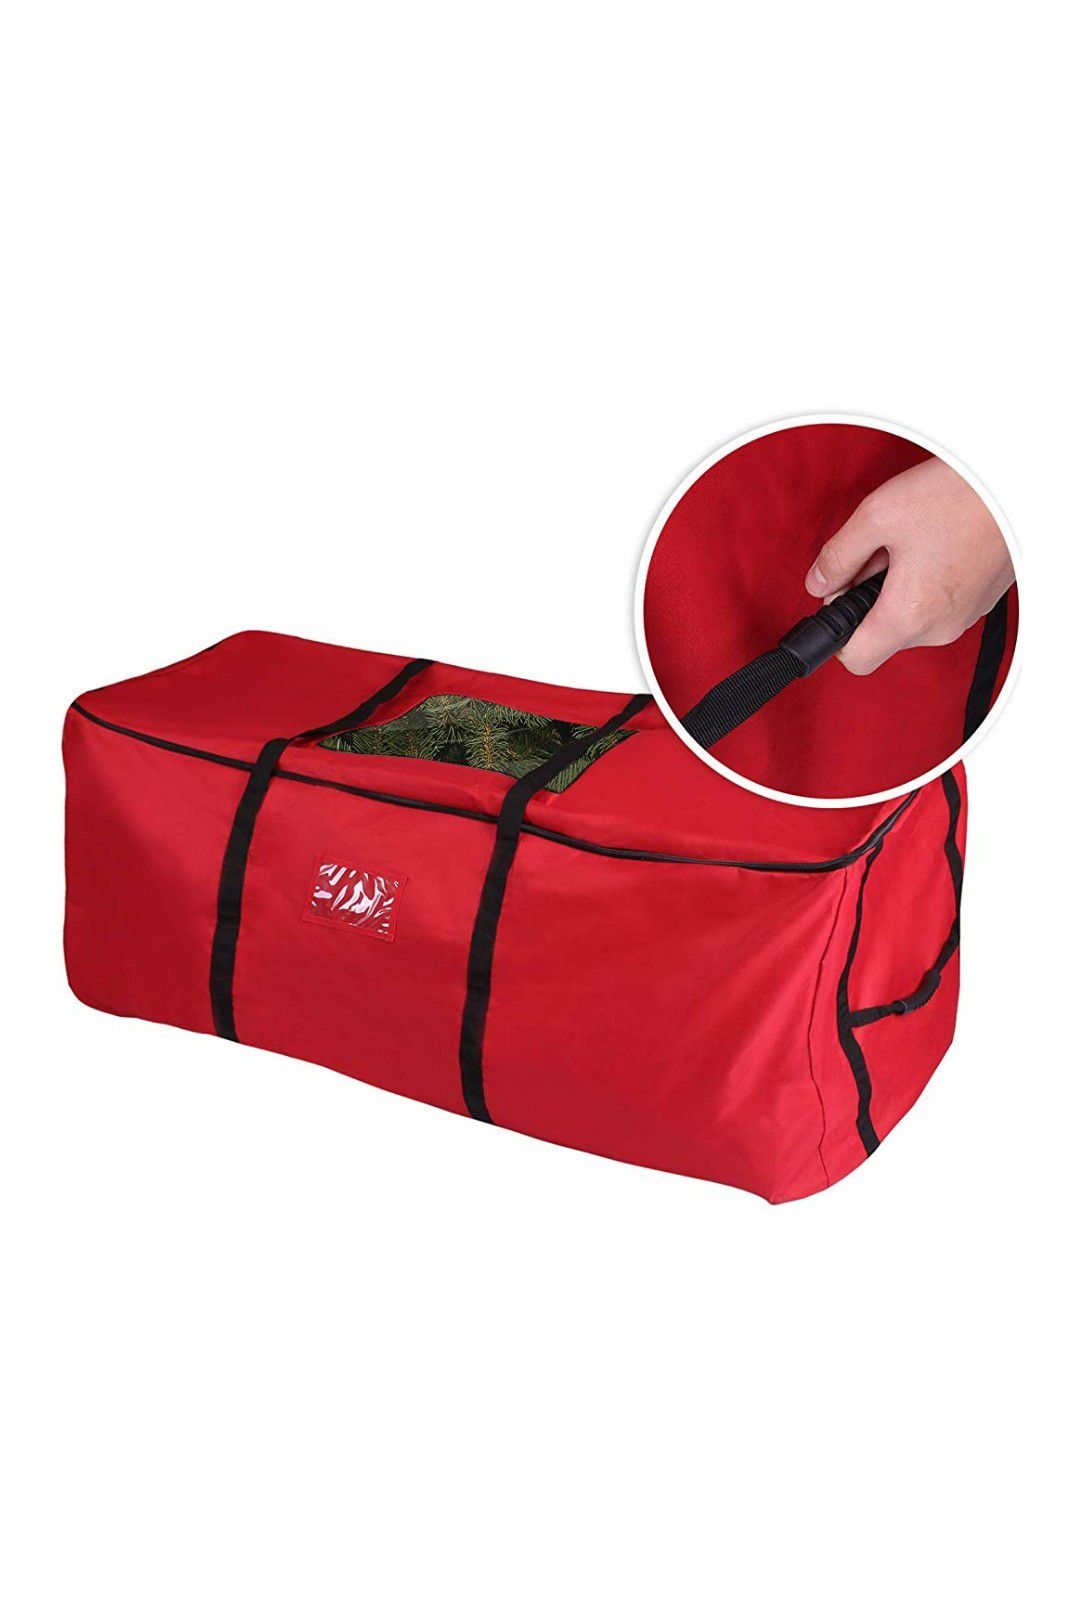 PENSON & CO. Christmas Tree Storage Bag, Heavy Duty Canvas Storage Container, Large for 9ft Artificial Tree-Red